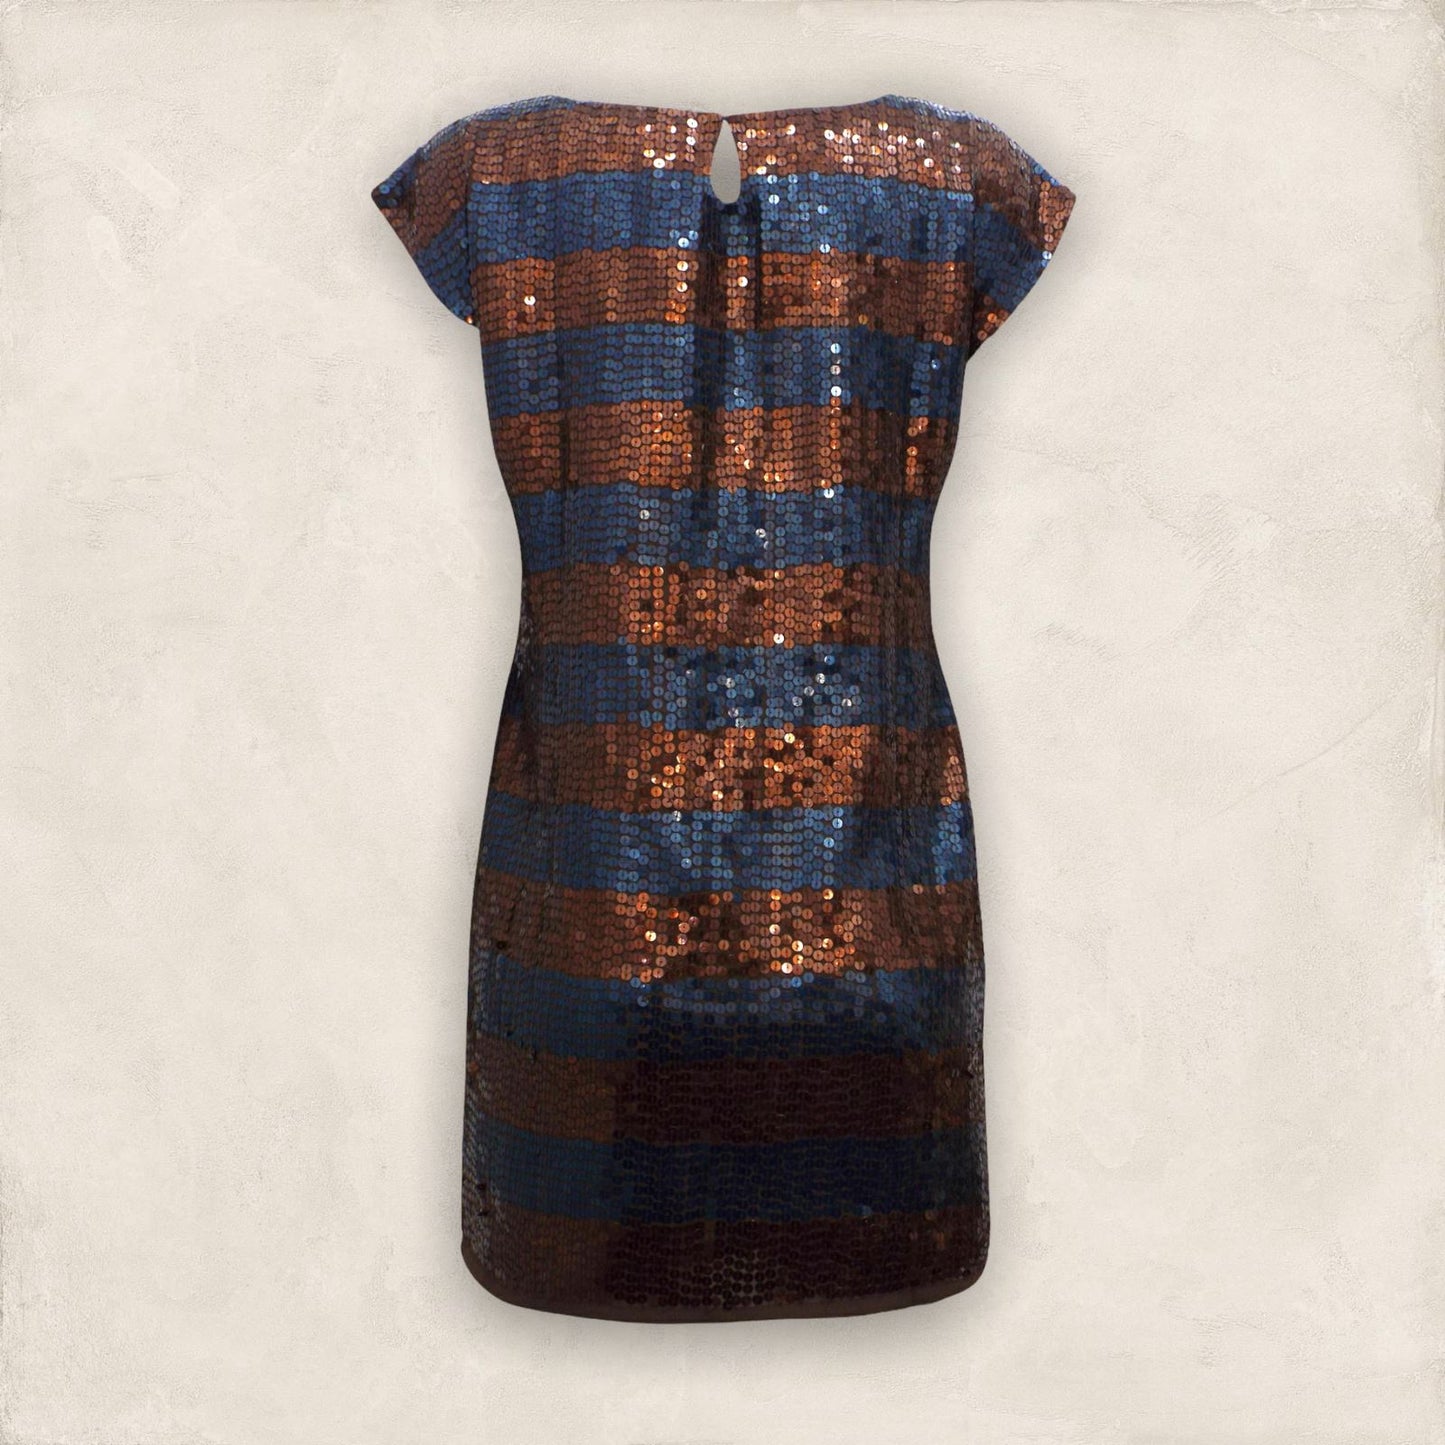 French Connection Copper & Ink Blue Striped Sequin Shift Dress UK 12 US 8 EU 40 Timeless Fashions